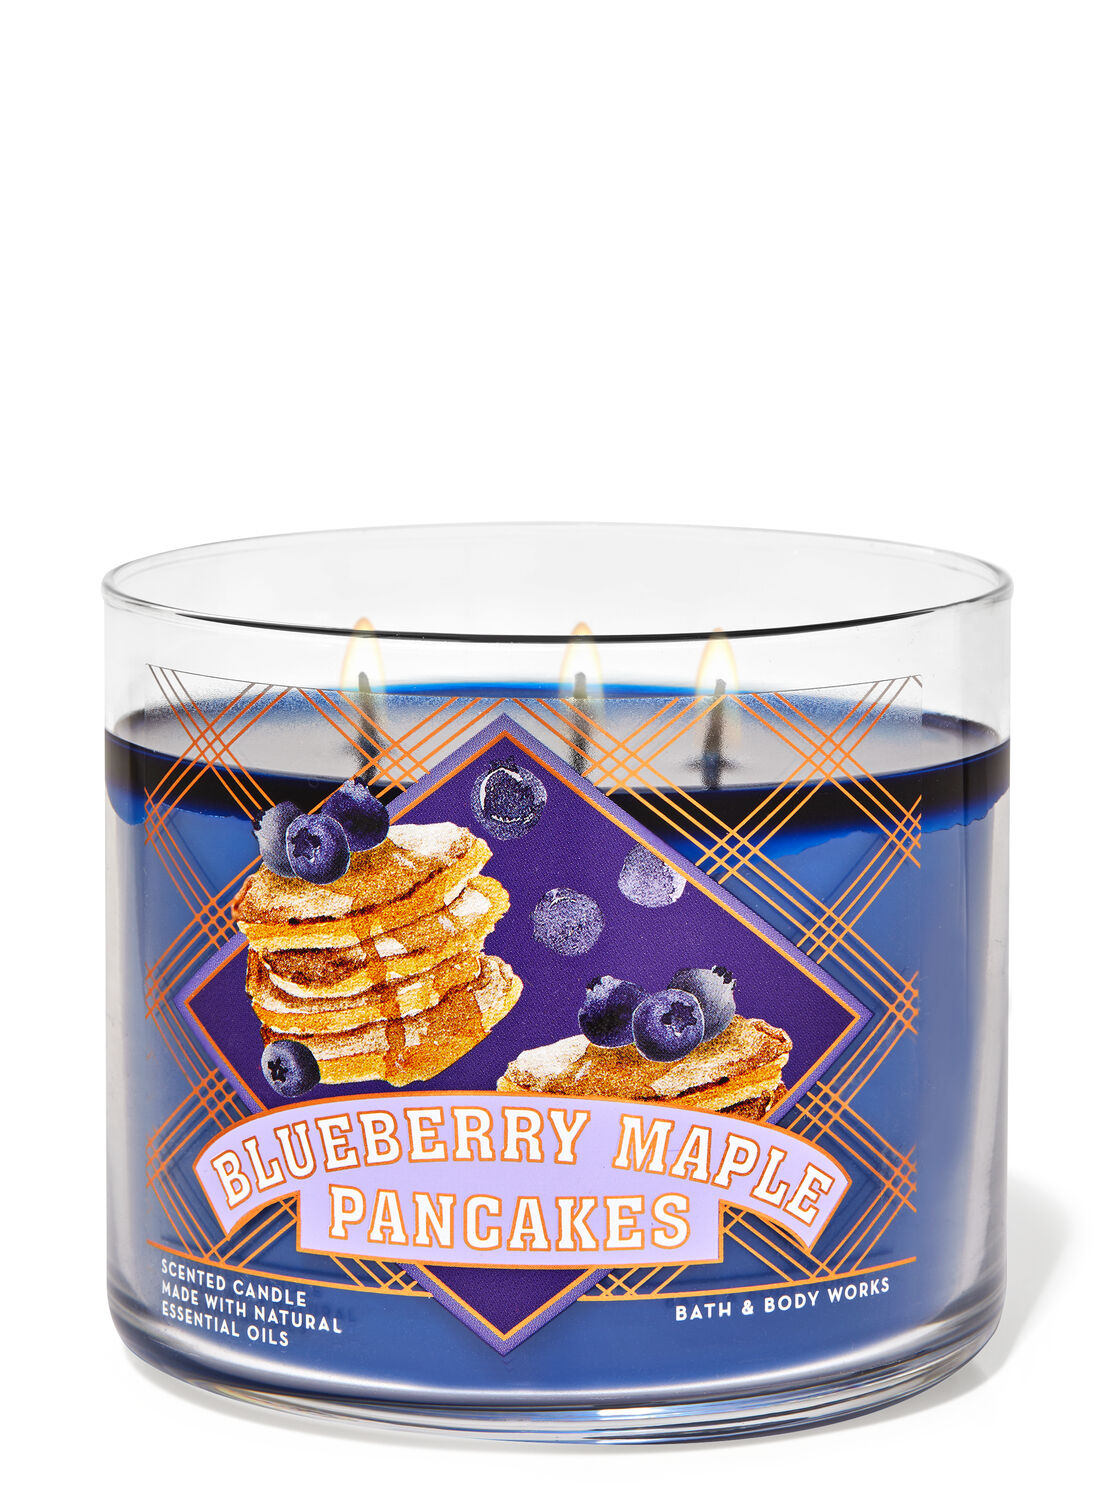 1 Bath & Body Works BLUEBERRY MAPLE PANCAKES Large 3-Wick Filled Candle 14.5 oz 